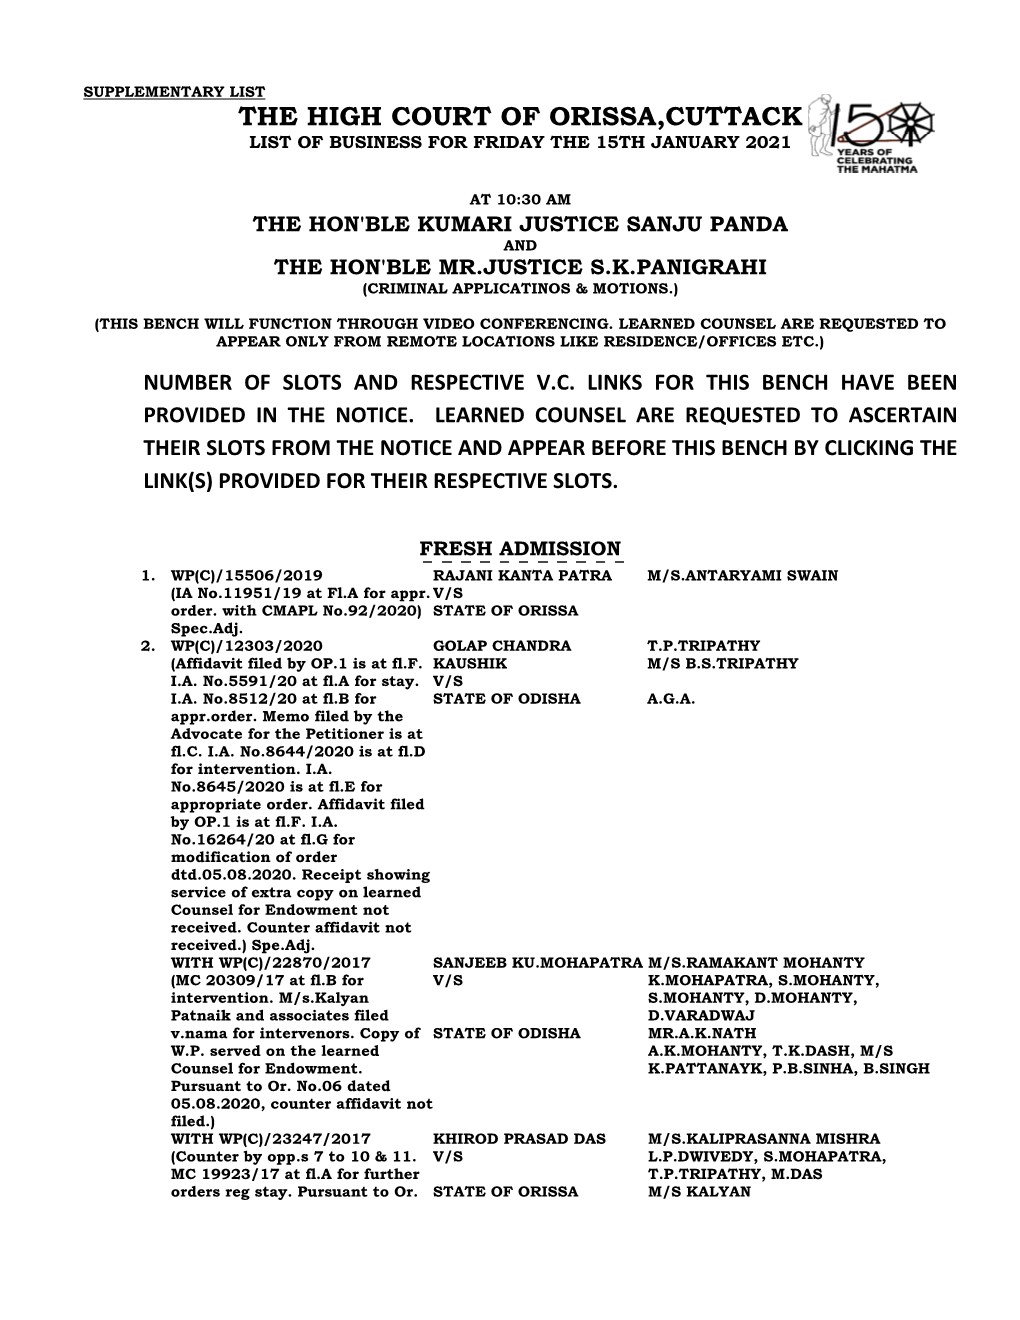 The High Court of Orissa,Cuttack List of Business for Friday the 15Th January 2021